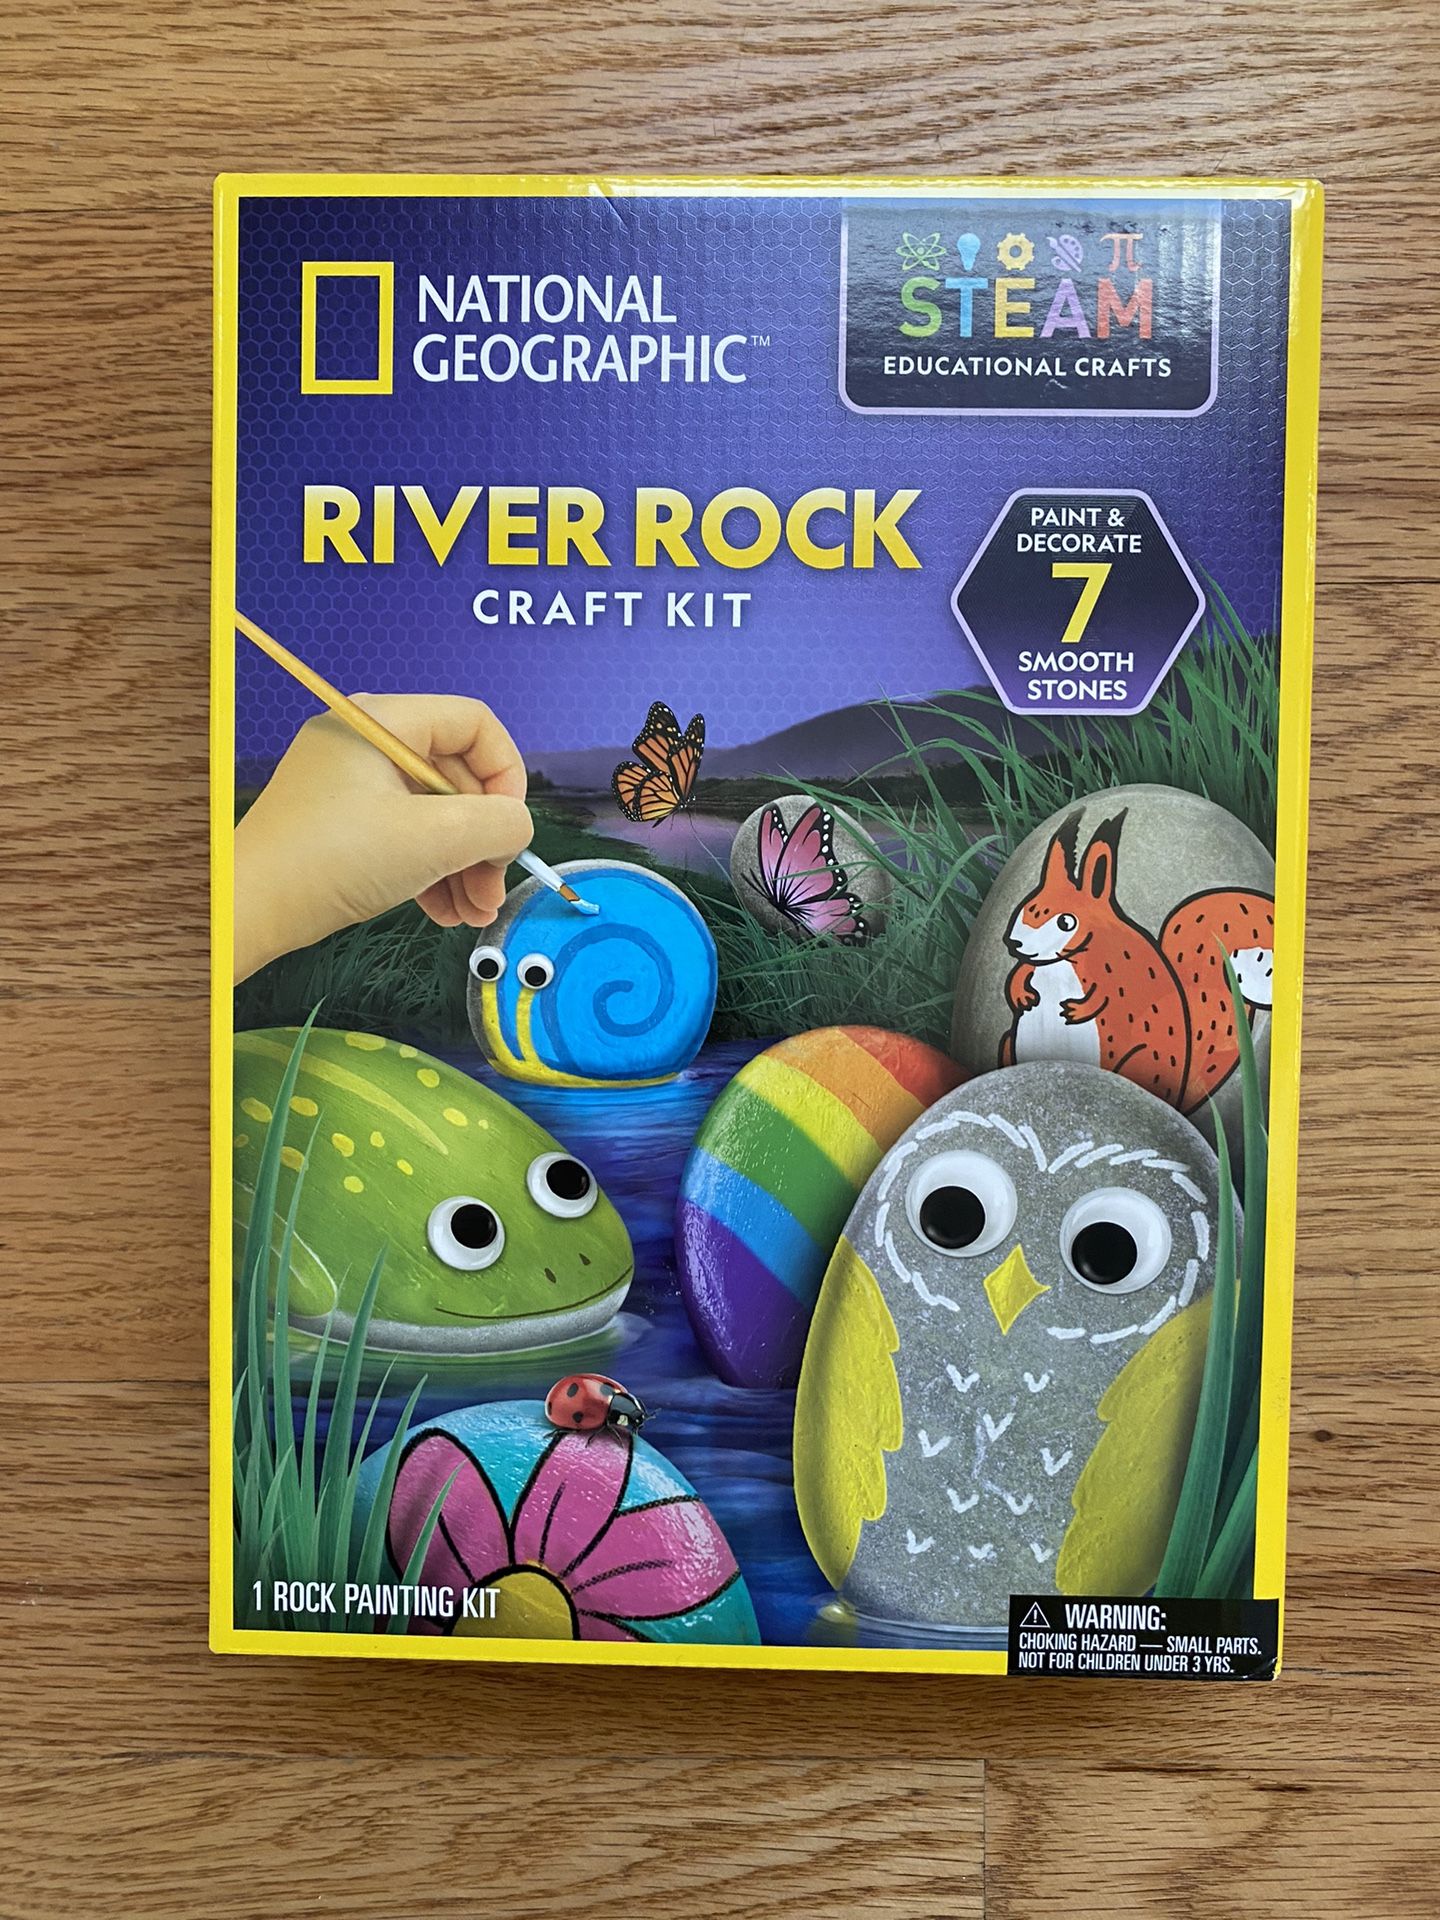 NATIONAL GEOGRAPHIC Rock Painting Kit for Kids - New in Box